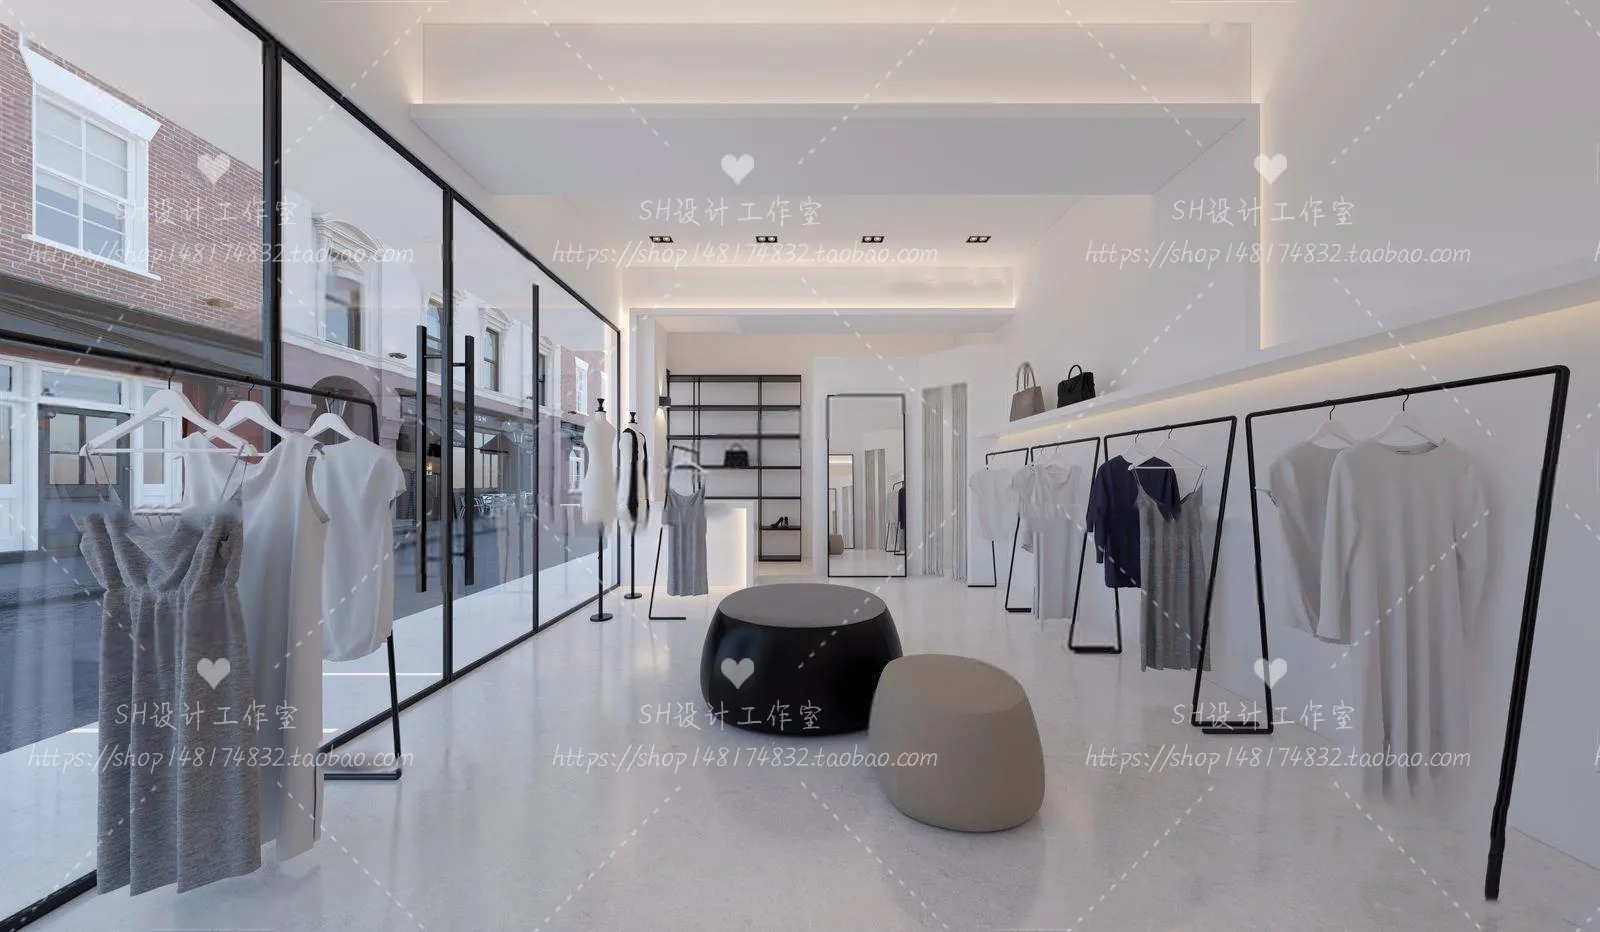 CLOTHING STORE 3D SCENES – VRAY RENDER – 38